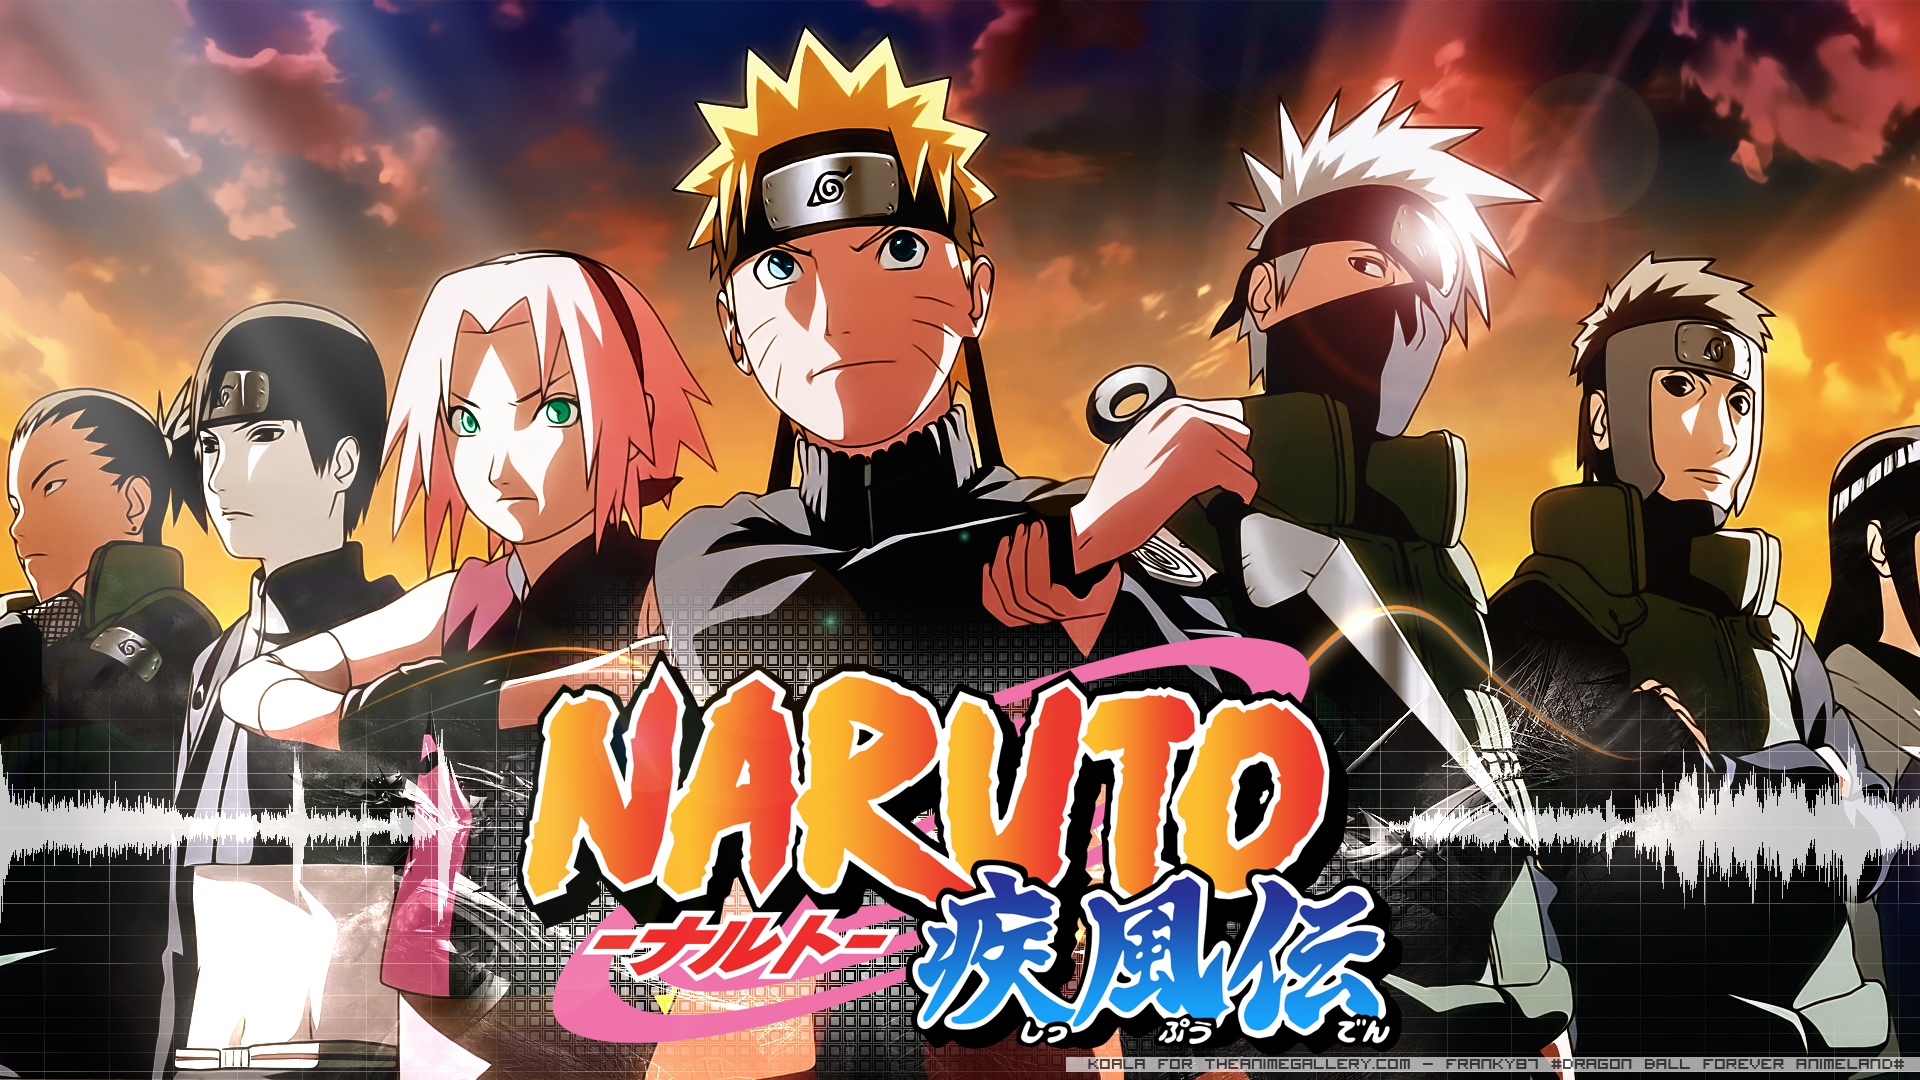 Naruto images naruto anime HD wallpaper and background photos 1920x1080